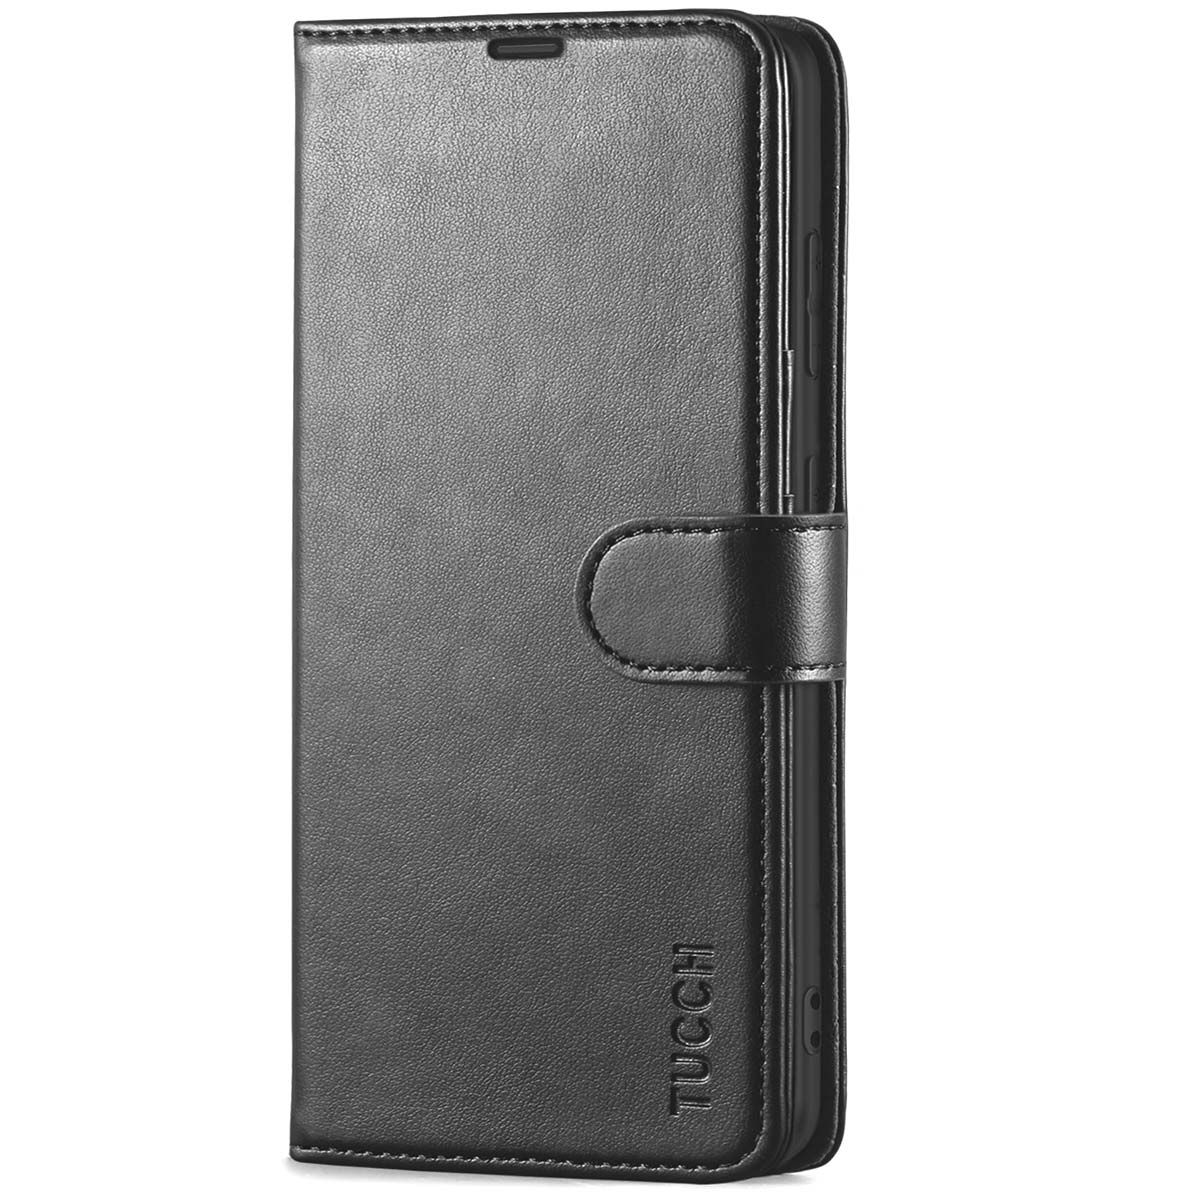 Cover for Leather Wallet case Kickstand Extra-Shockproof Business Card Holders Flip Cover Samsung Galaxy S9 Plus Flip Case 